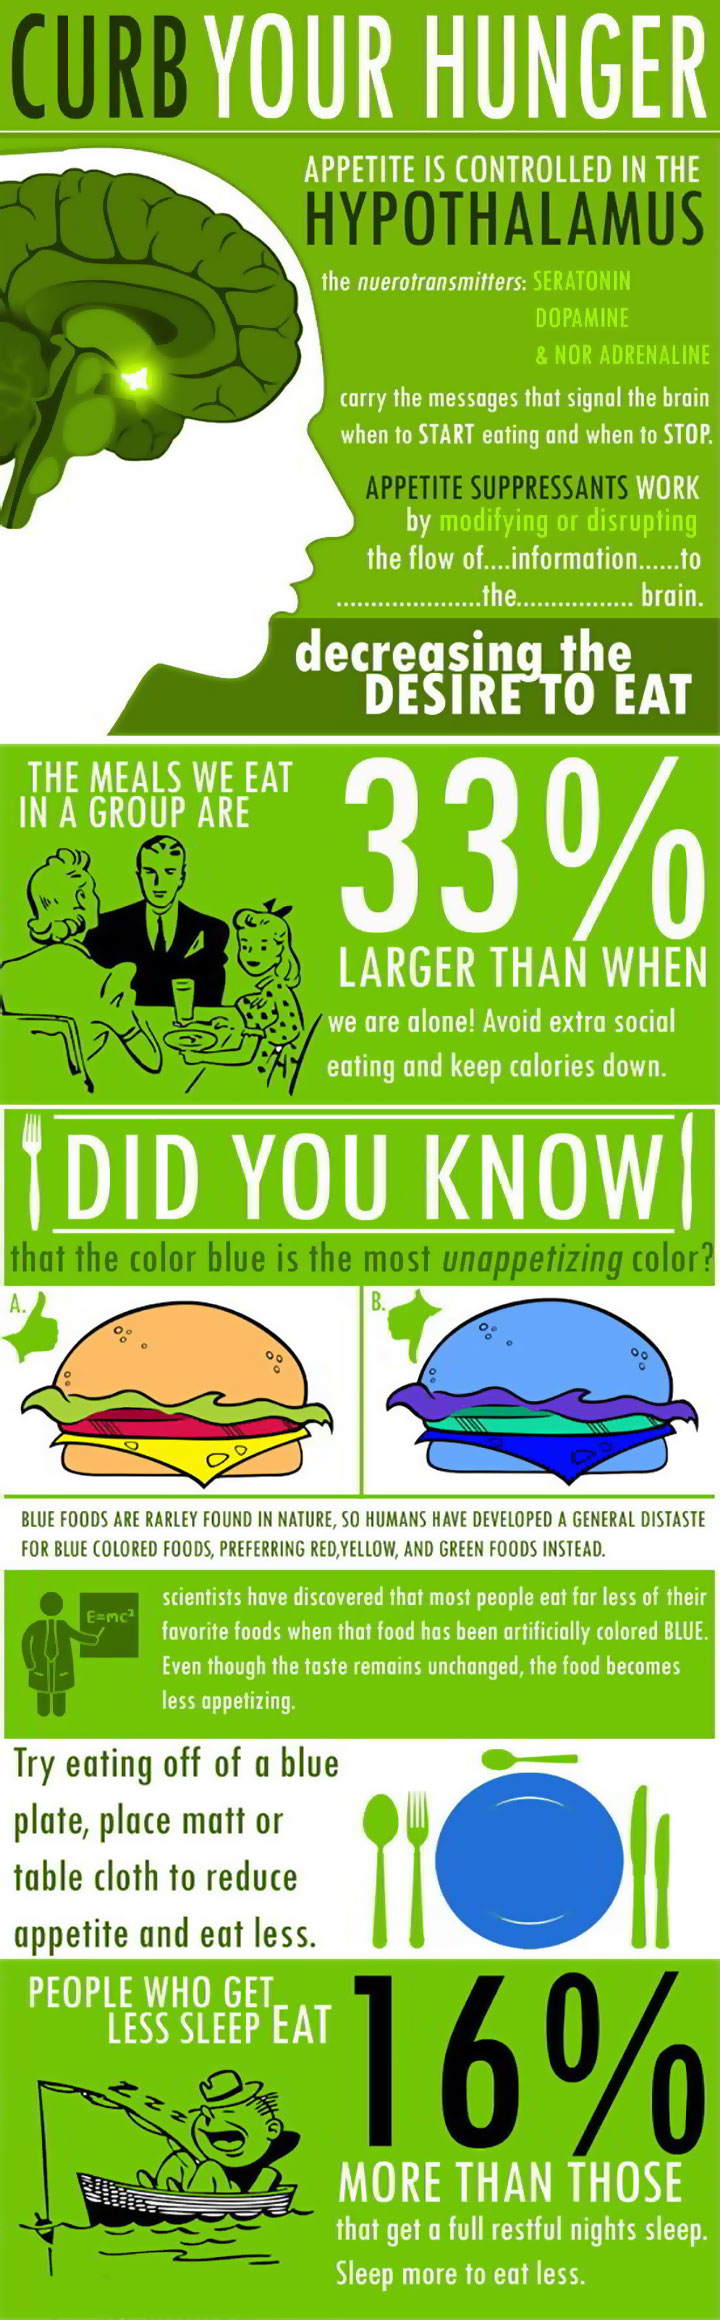 Curb Your Hunger Infographic